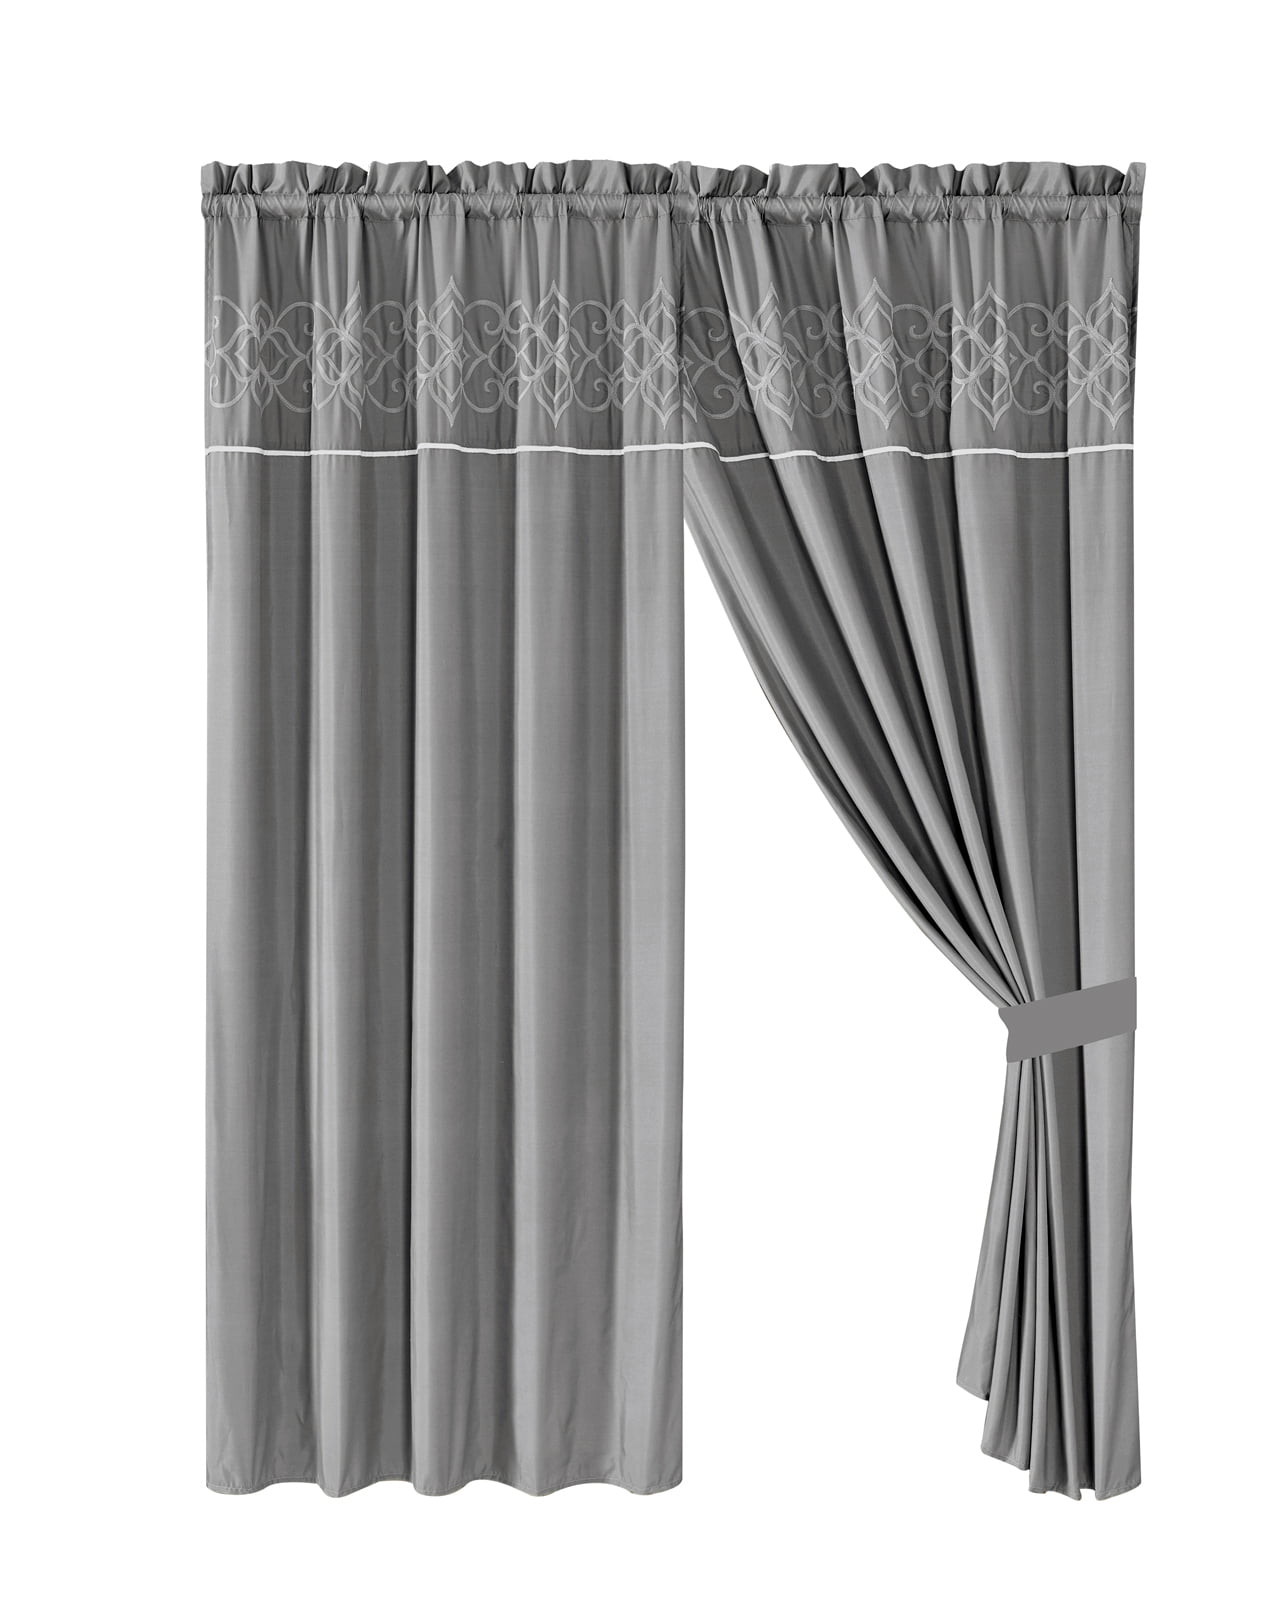 Lotus Beautiful lined Floral voile Curtains White/silver & Champagne/Gold 